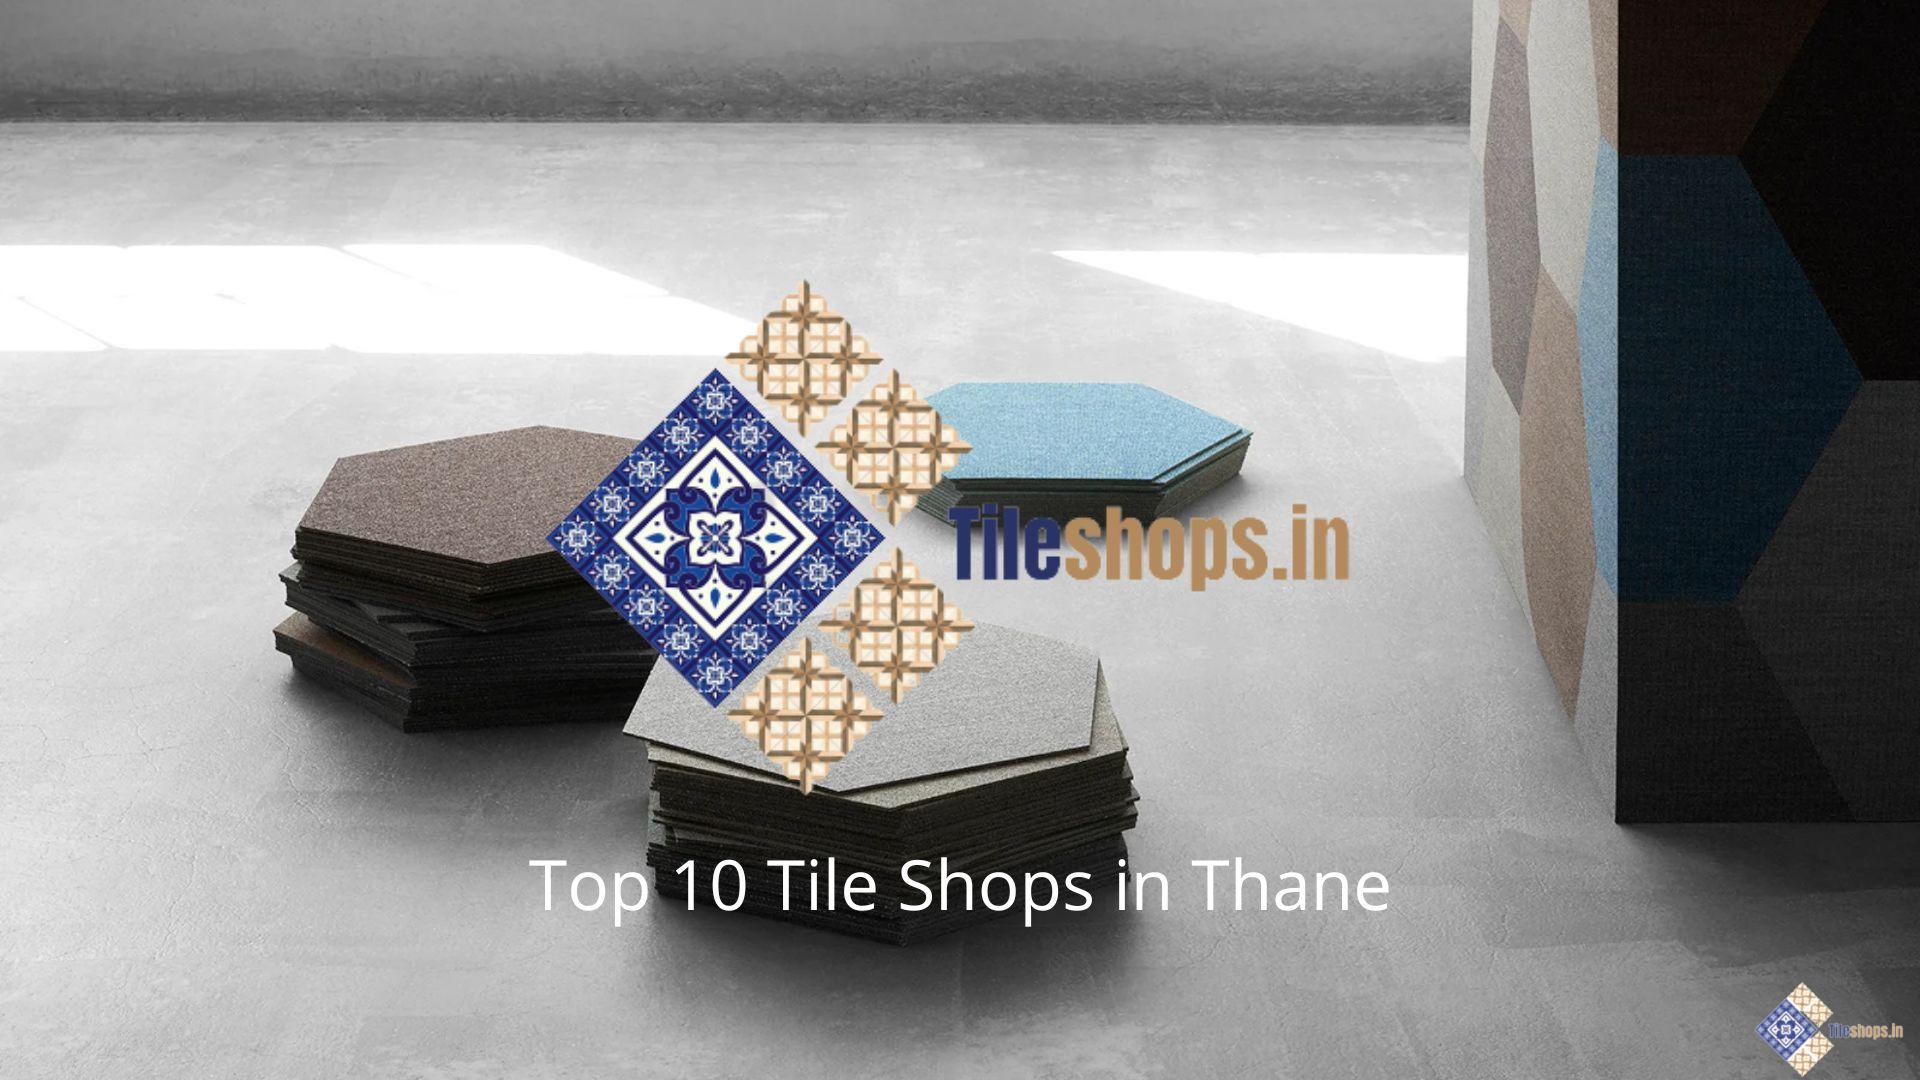 Top 10 Tile Shops in Thane